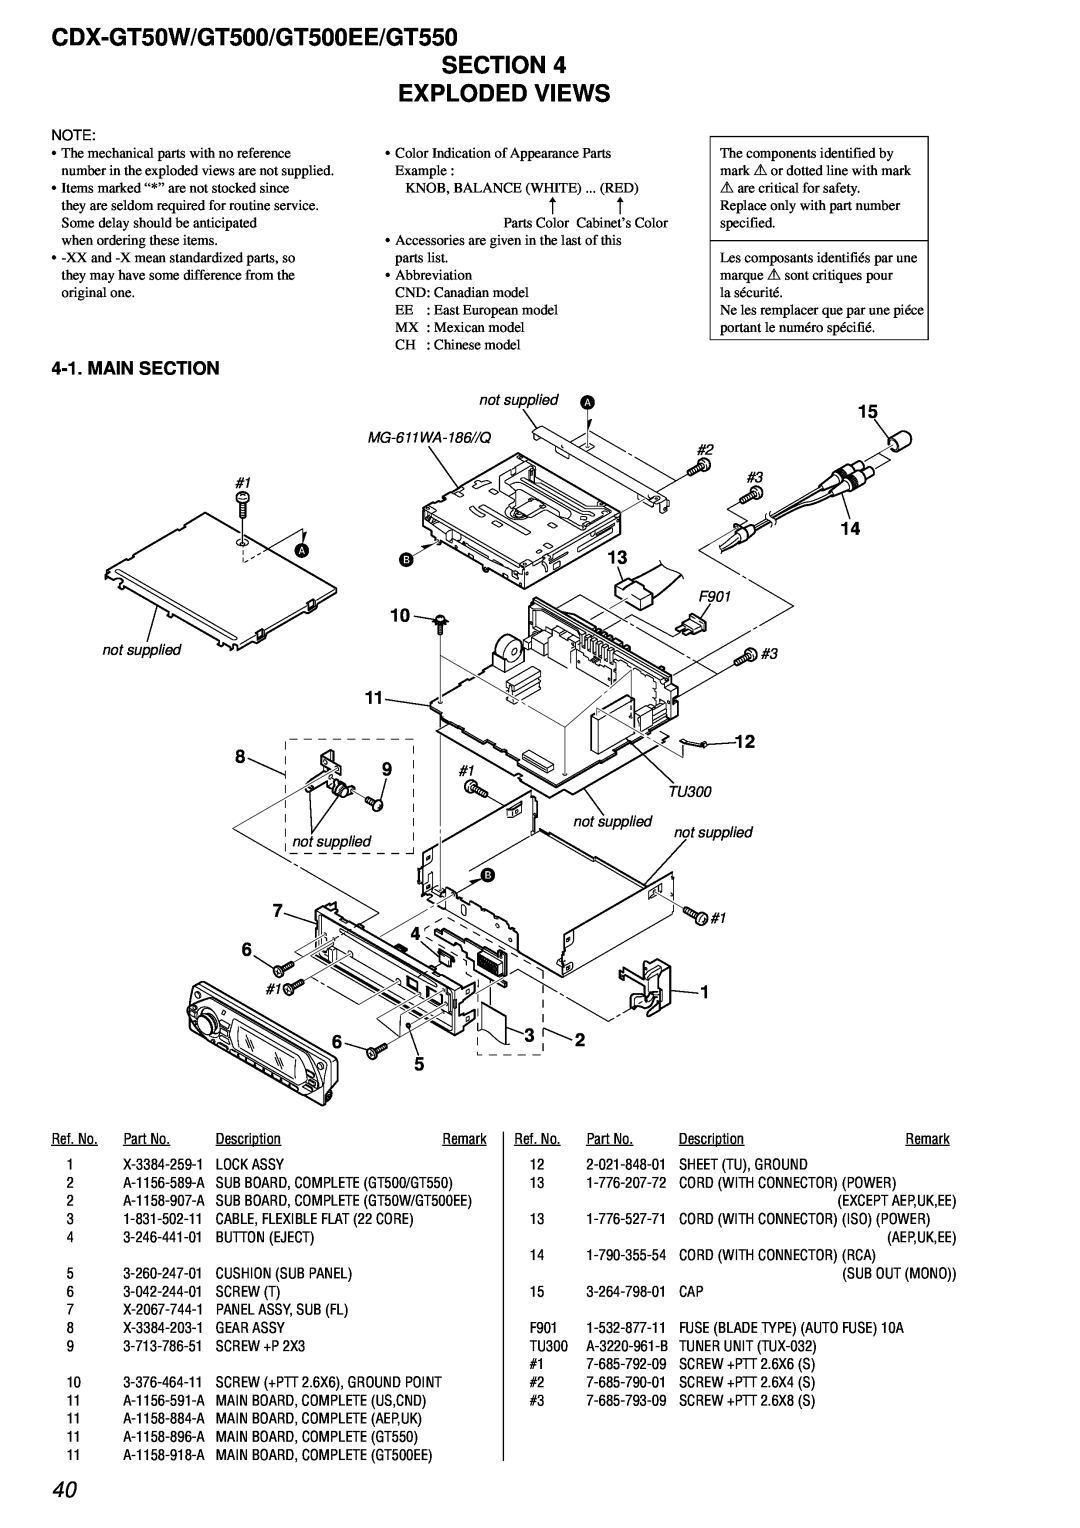 Sony CDX-GT500EE, CDX-GT550 service manual Exploded Views, Main Section, CDX-GT50W/GT500/GT500EE/GT550 SECTION 